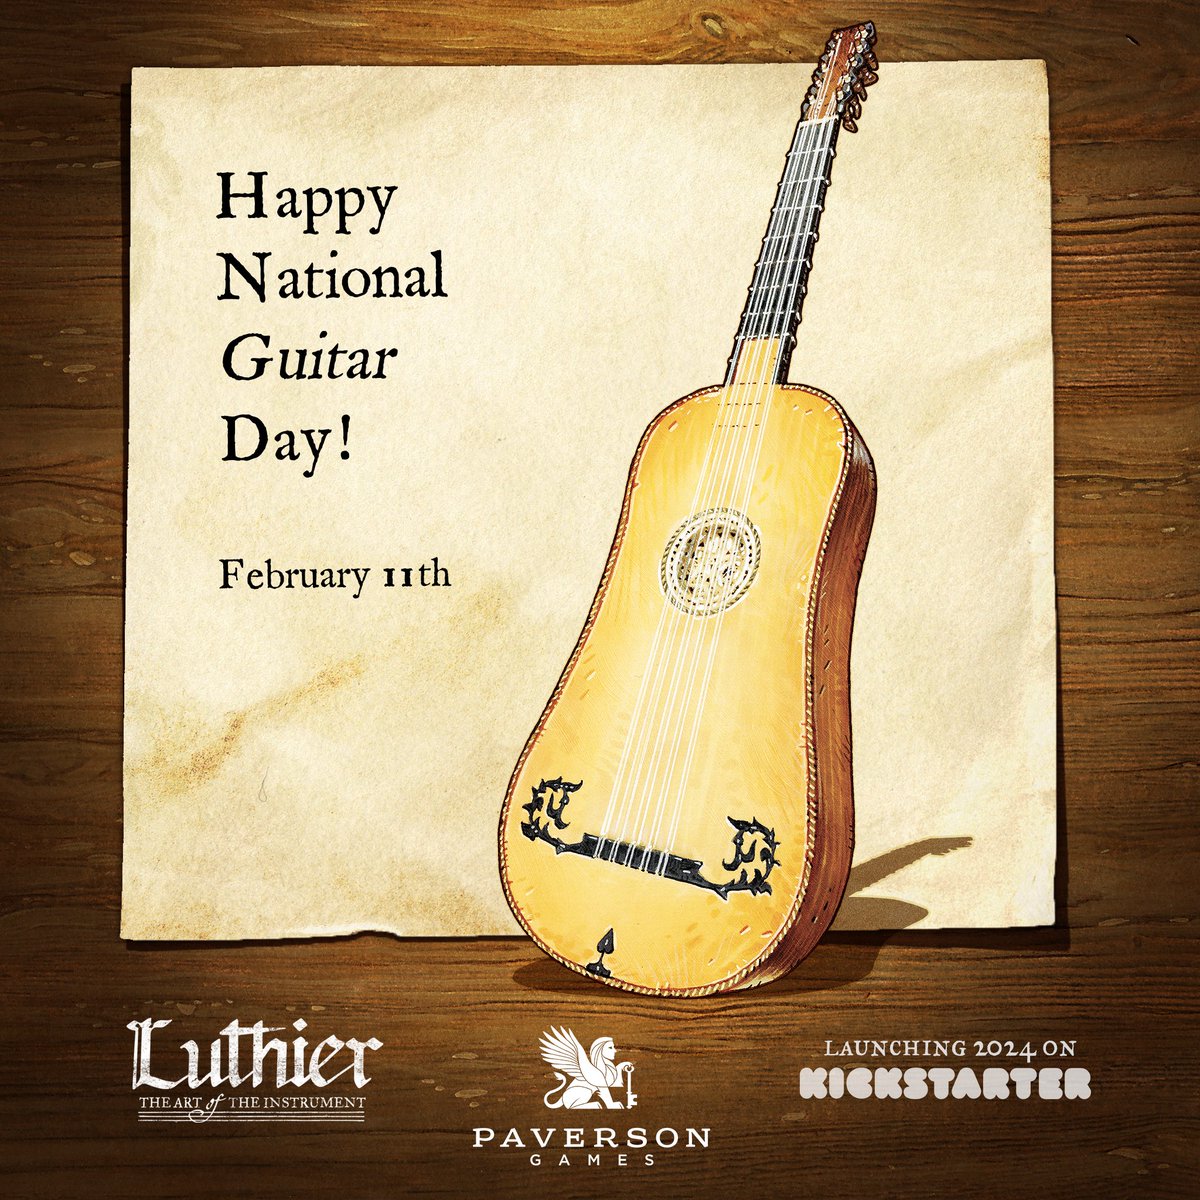 Happy National #Guitar Day! 🎸 What's your favorite guitar solo of all time? 🤘 Look for our board game, #Luthier, coming to #Kickstarter in 2024! 🥳🎻🎲 #nationalguitarday #musicalinstrument #luthiergame #paversongames #baroque #classicalmusic #music #luthiery #chambermusic